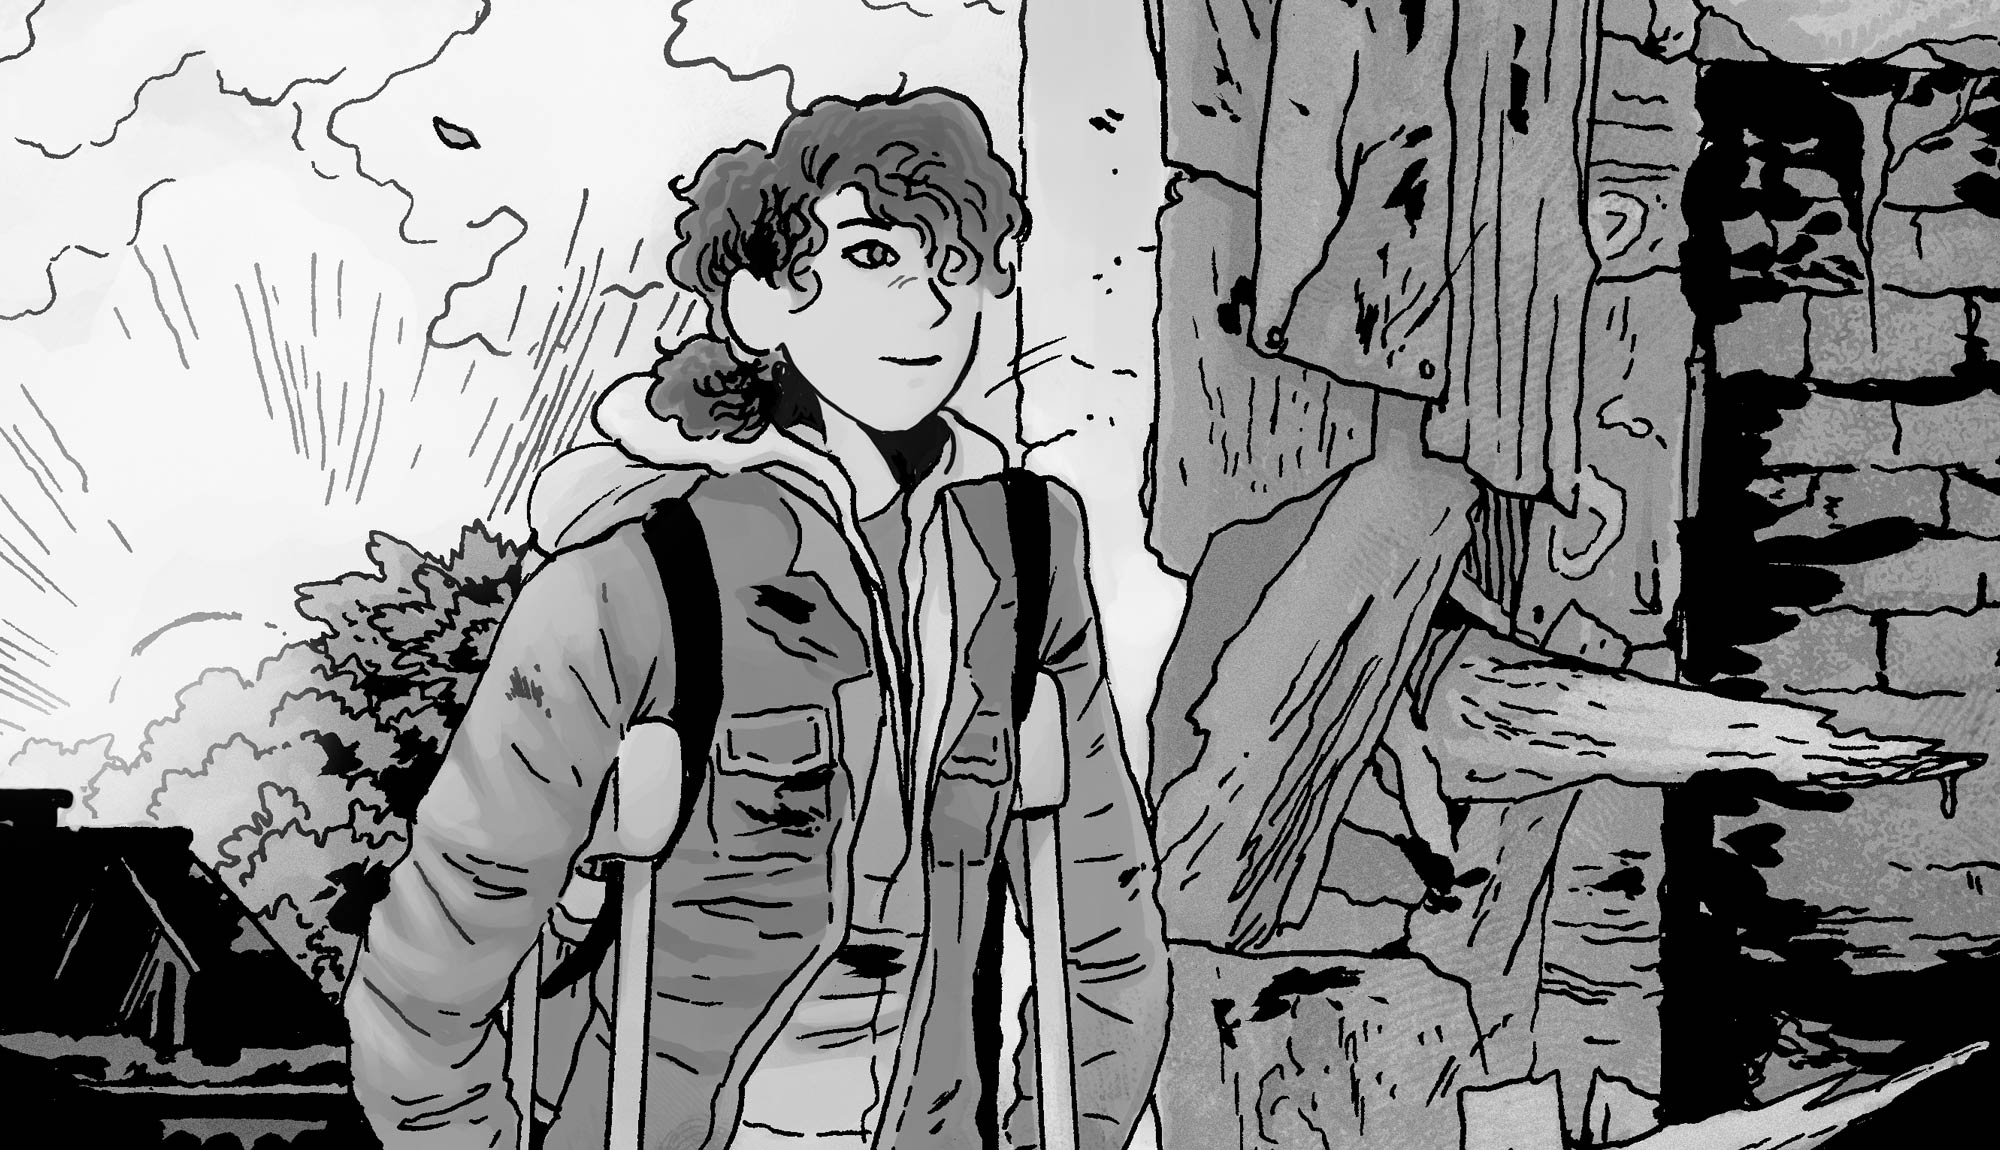 Is clementine in the walking dead comics